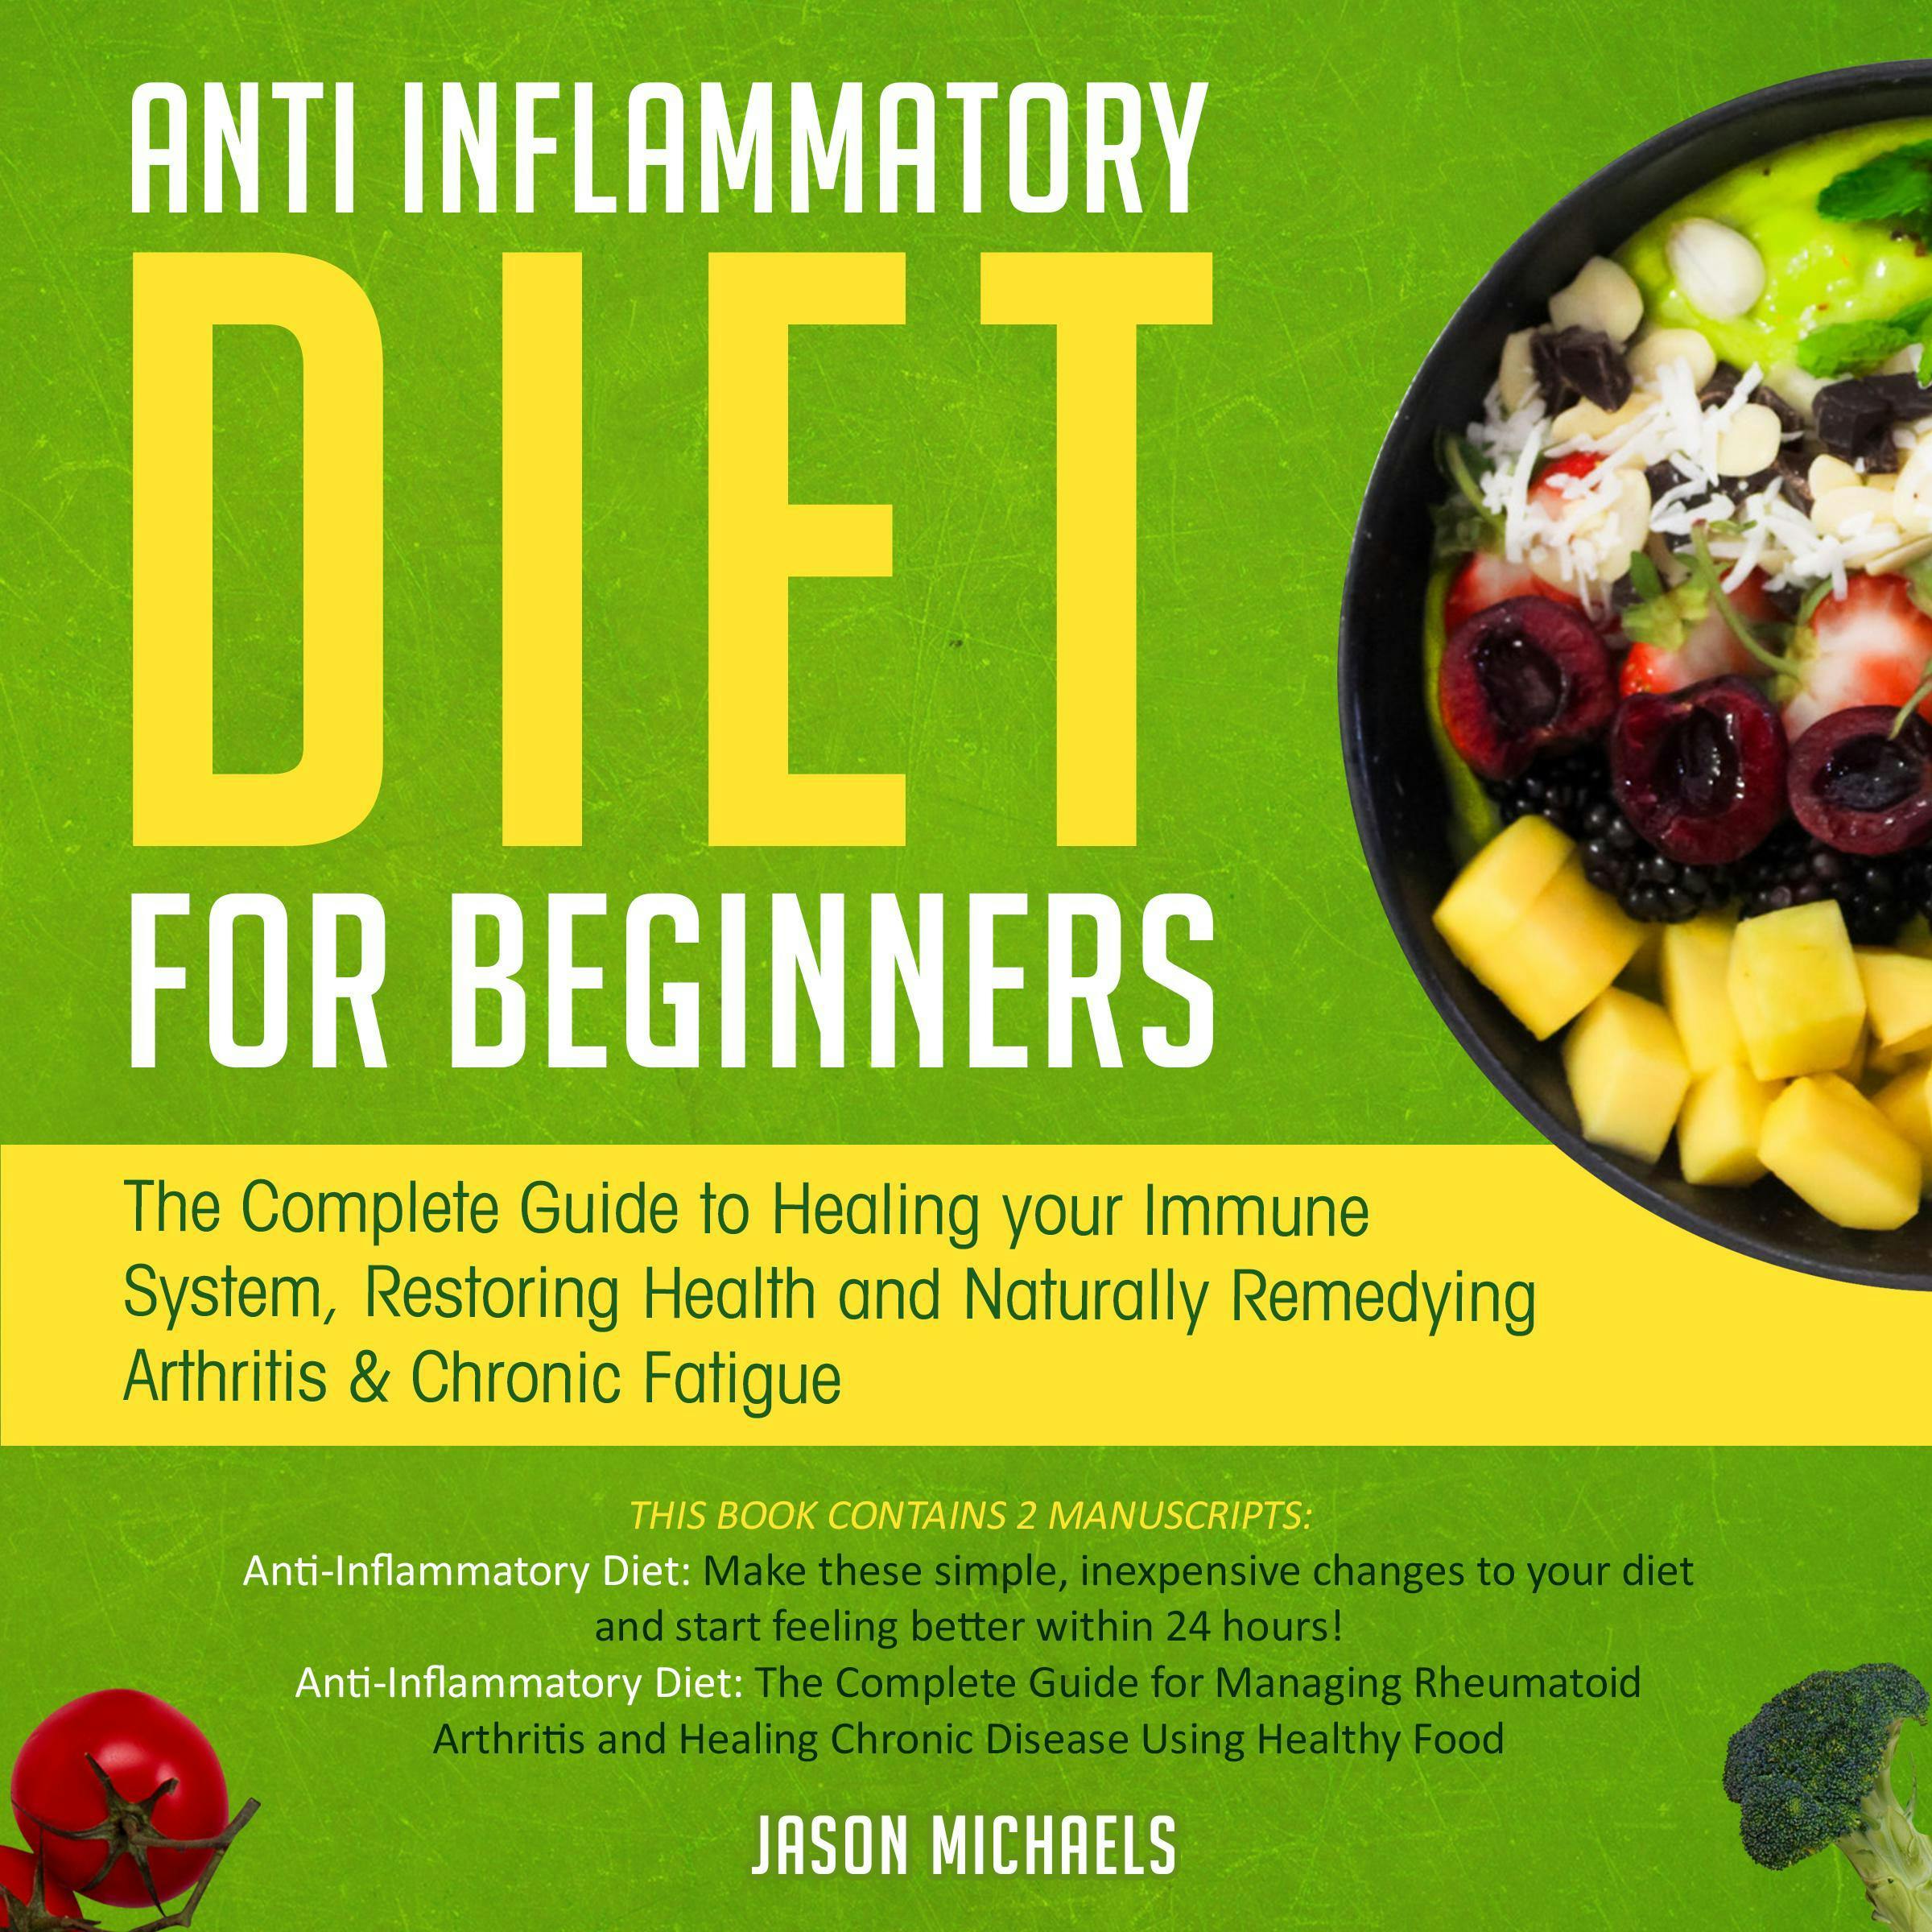 Anti-Inflammatory Diet For Beginners: The Complete Guide to Healing Your Immune System, Restoring Health and Naturally Remedying Arthritis & Chronic Fatigue - undefined